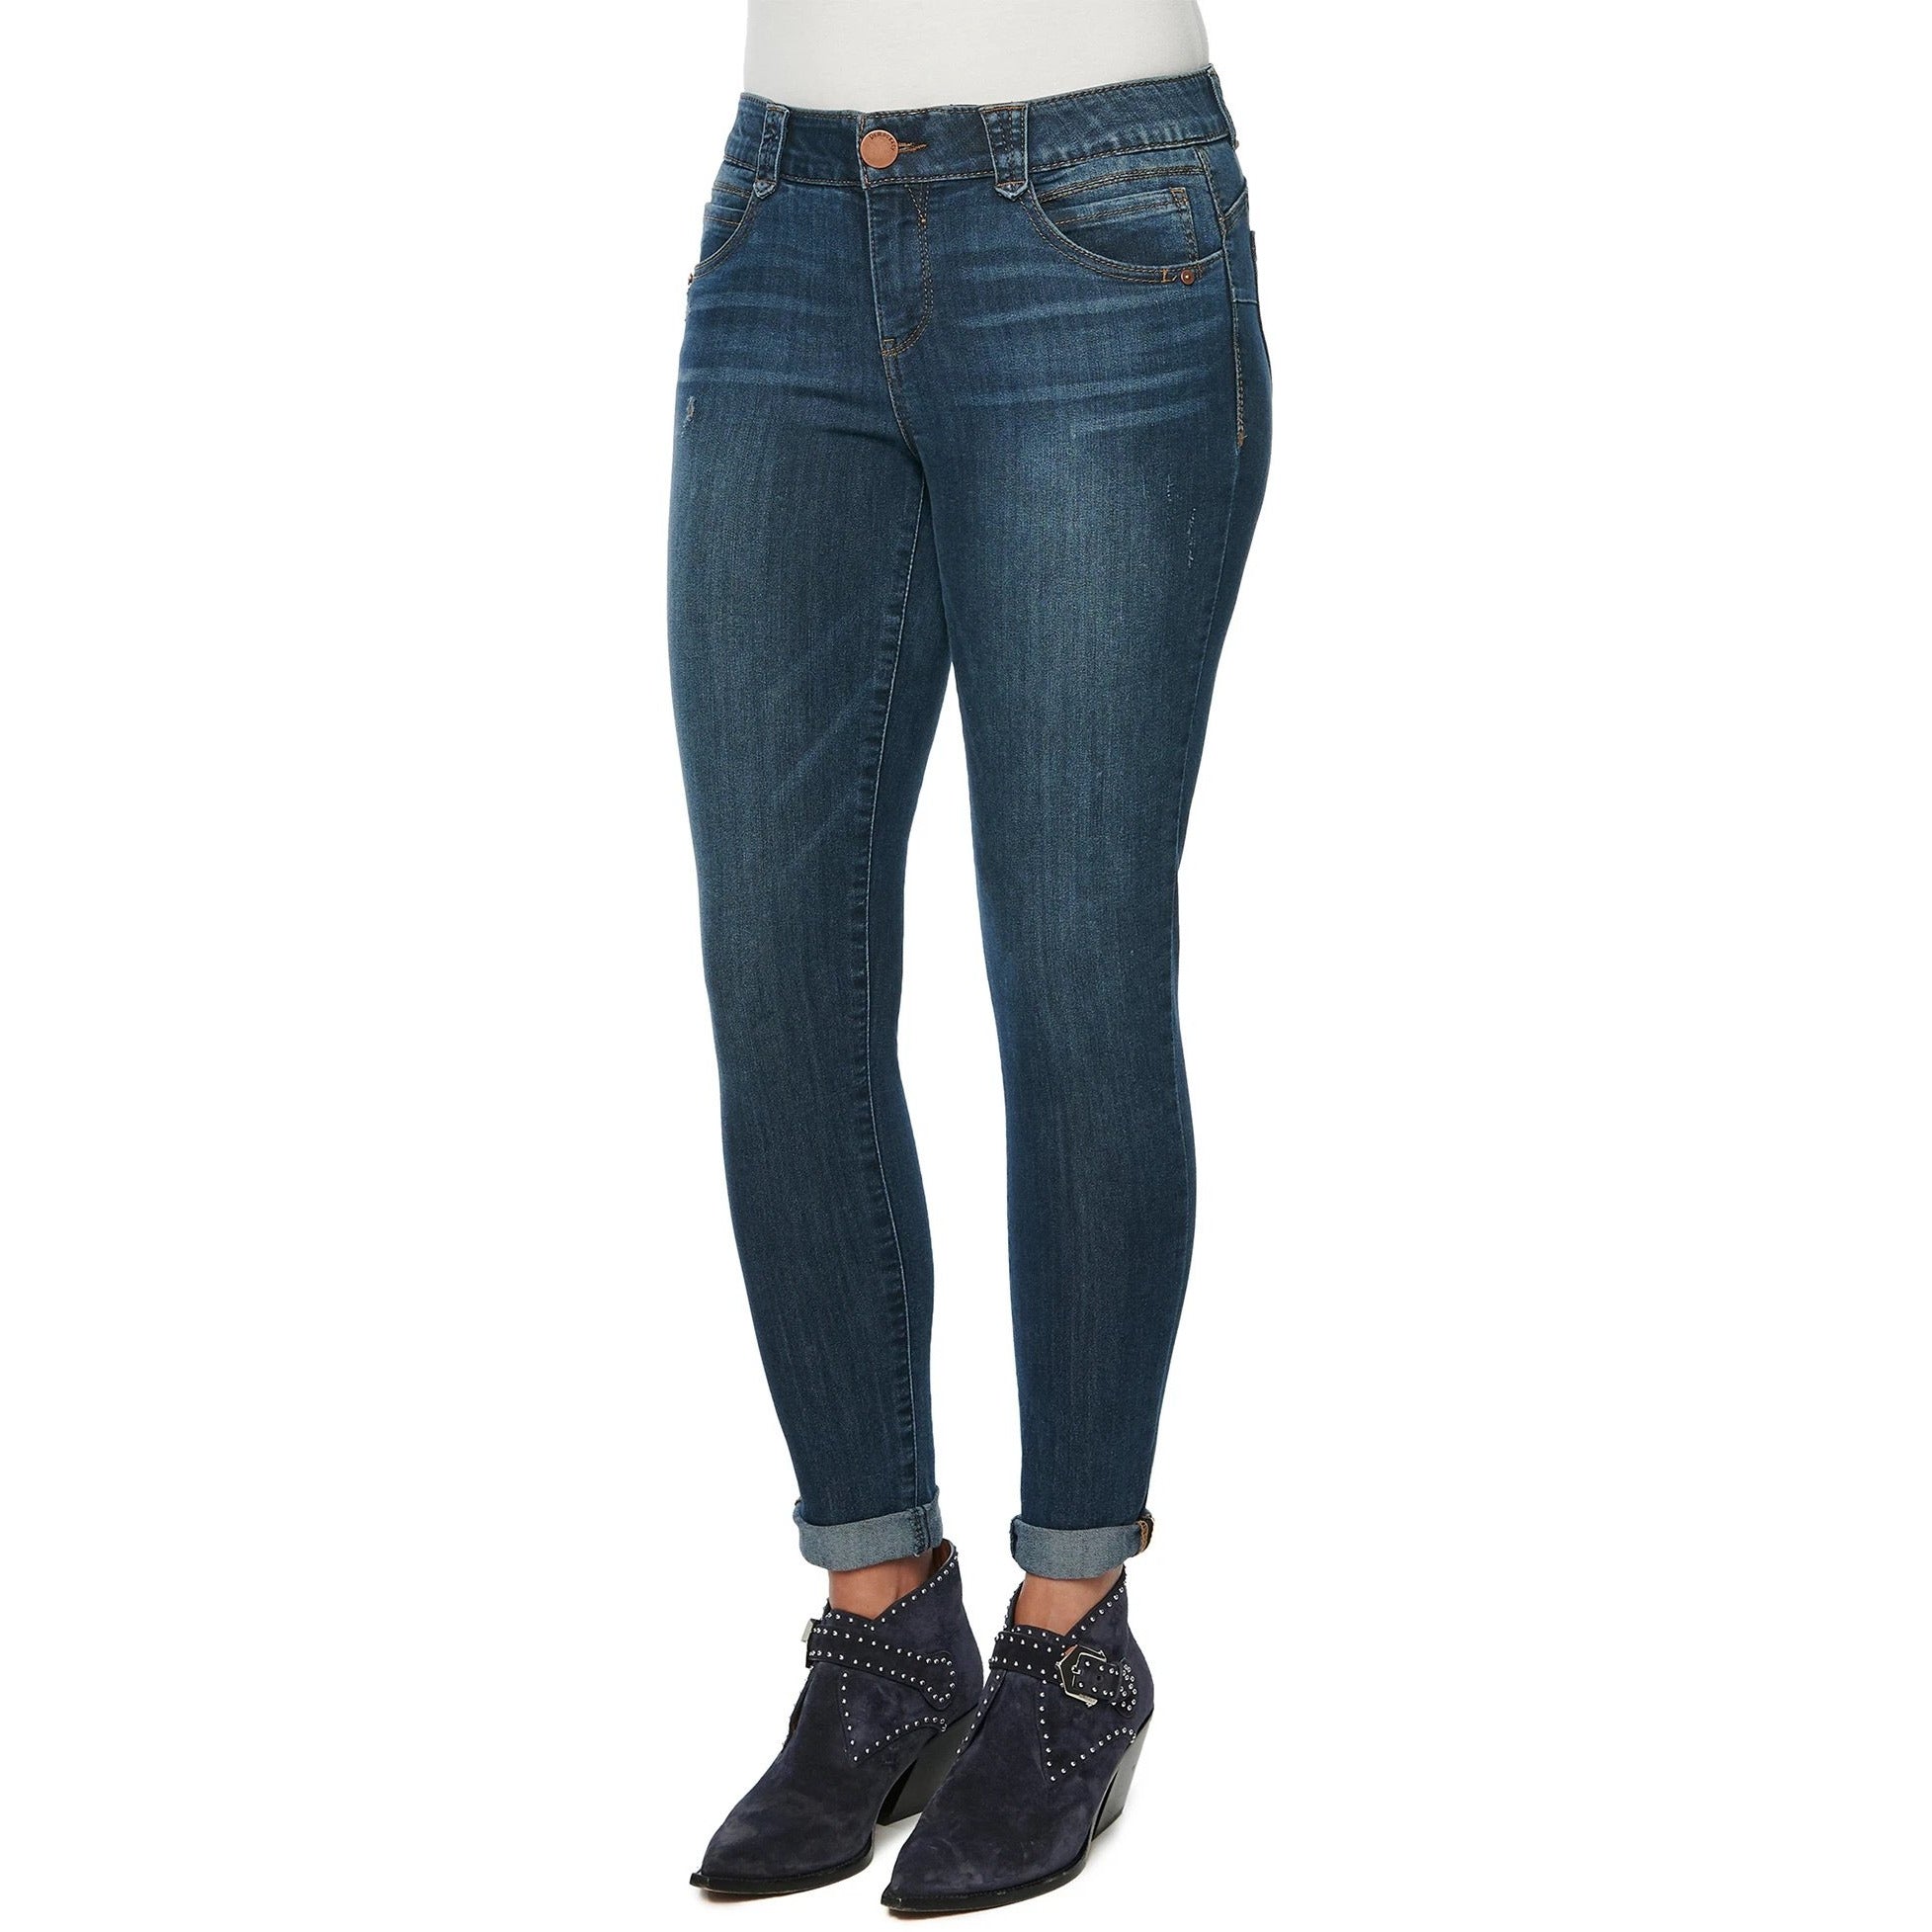 Absolution Seamless Ankle Skimmer Fray Hem Jeans with Embroidery